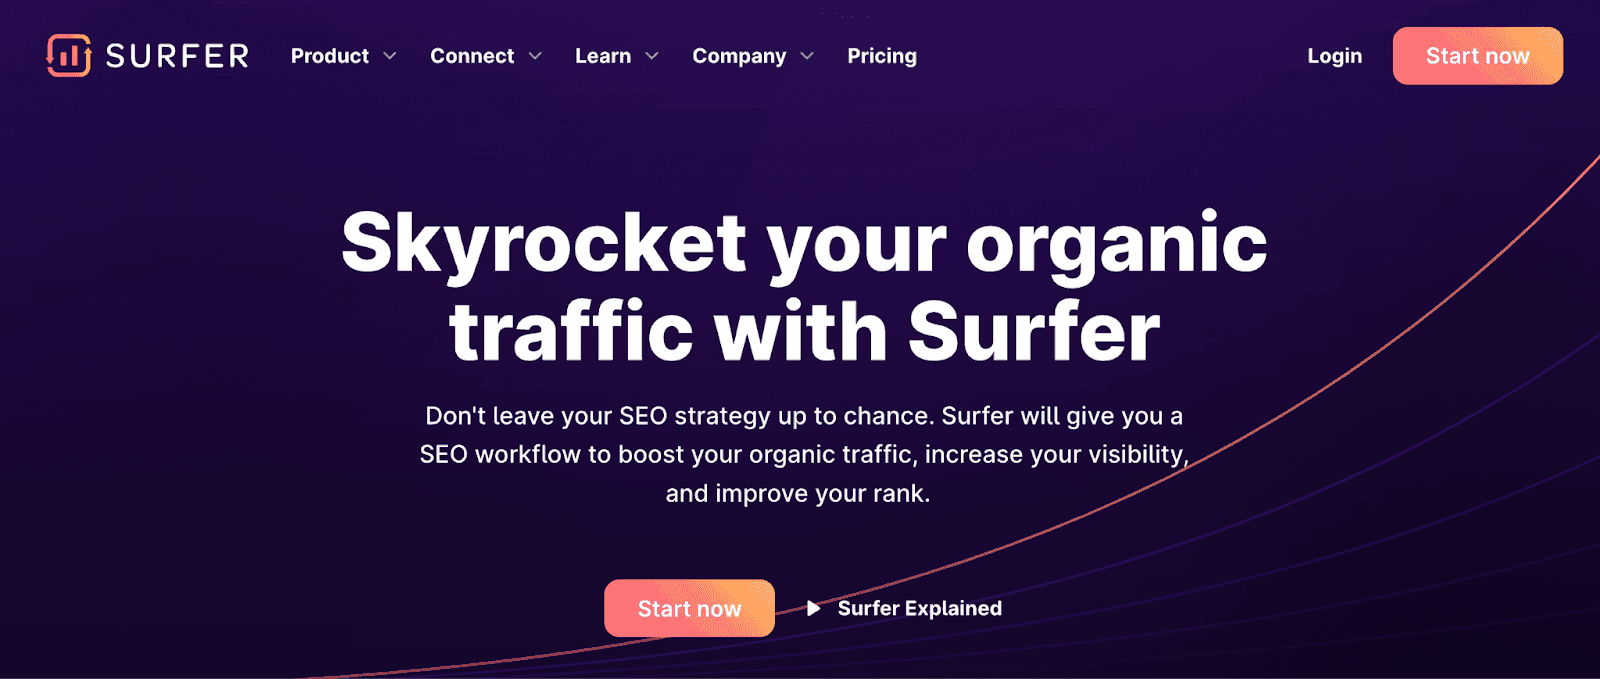 SEO Surfer homepage - Skyrocket your organic traffic with Surfer